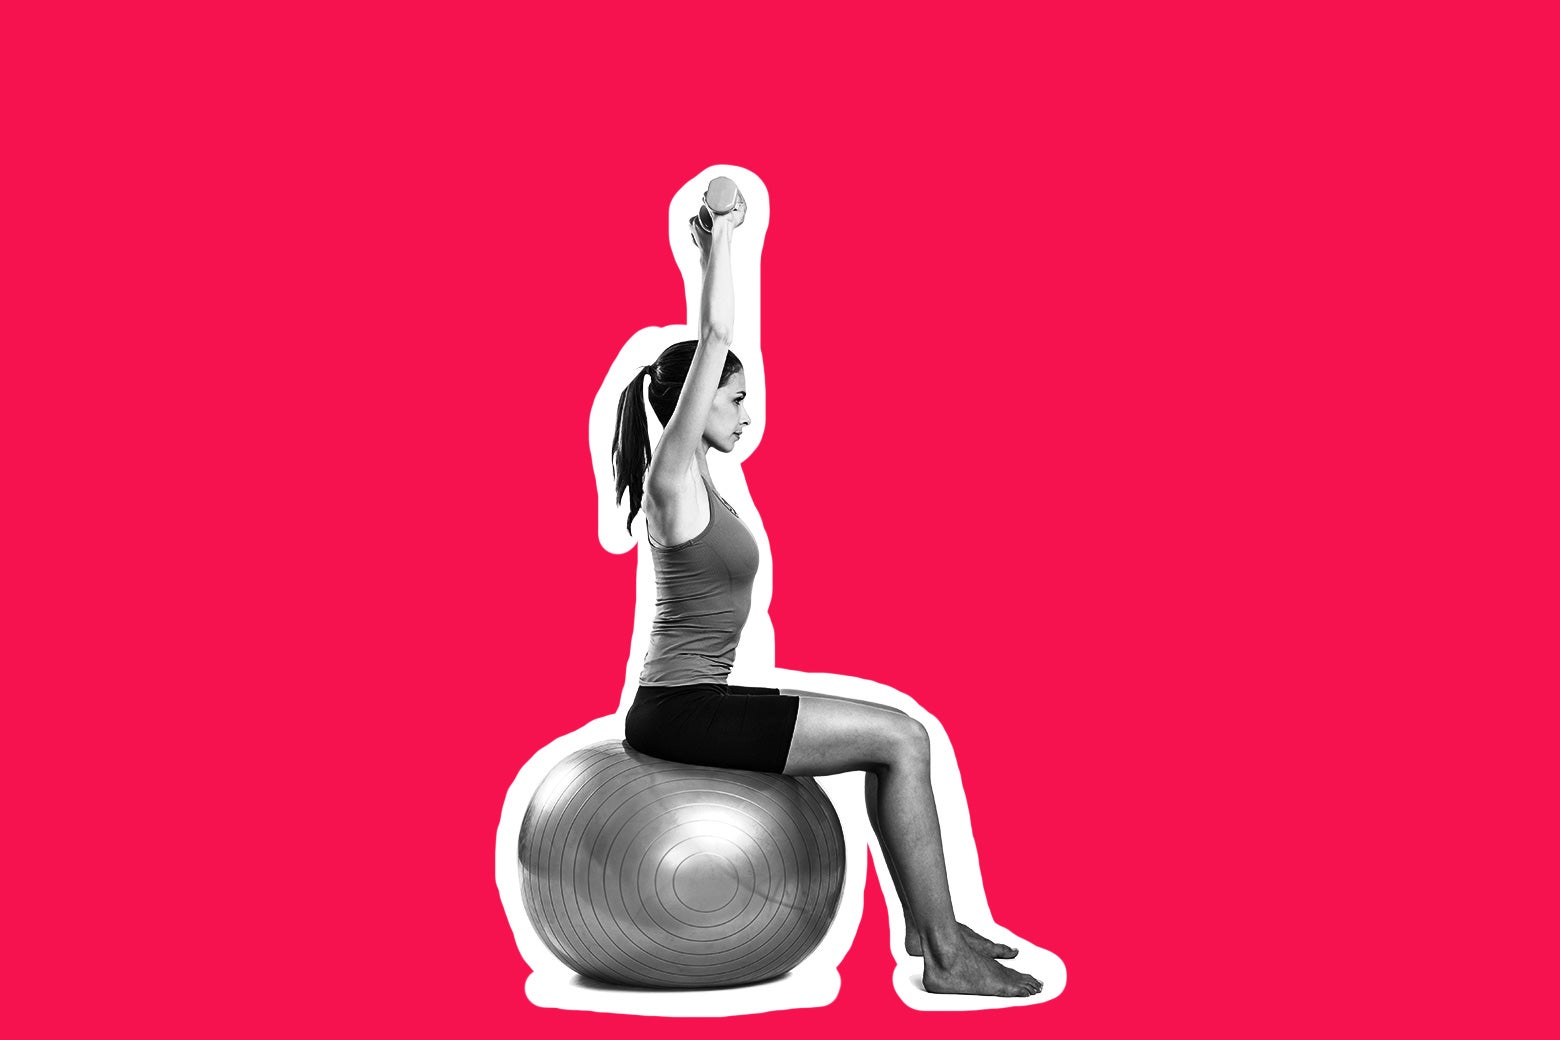 A woman sitting on an exercise ball, holding a weight above her head.